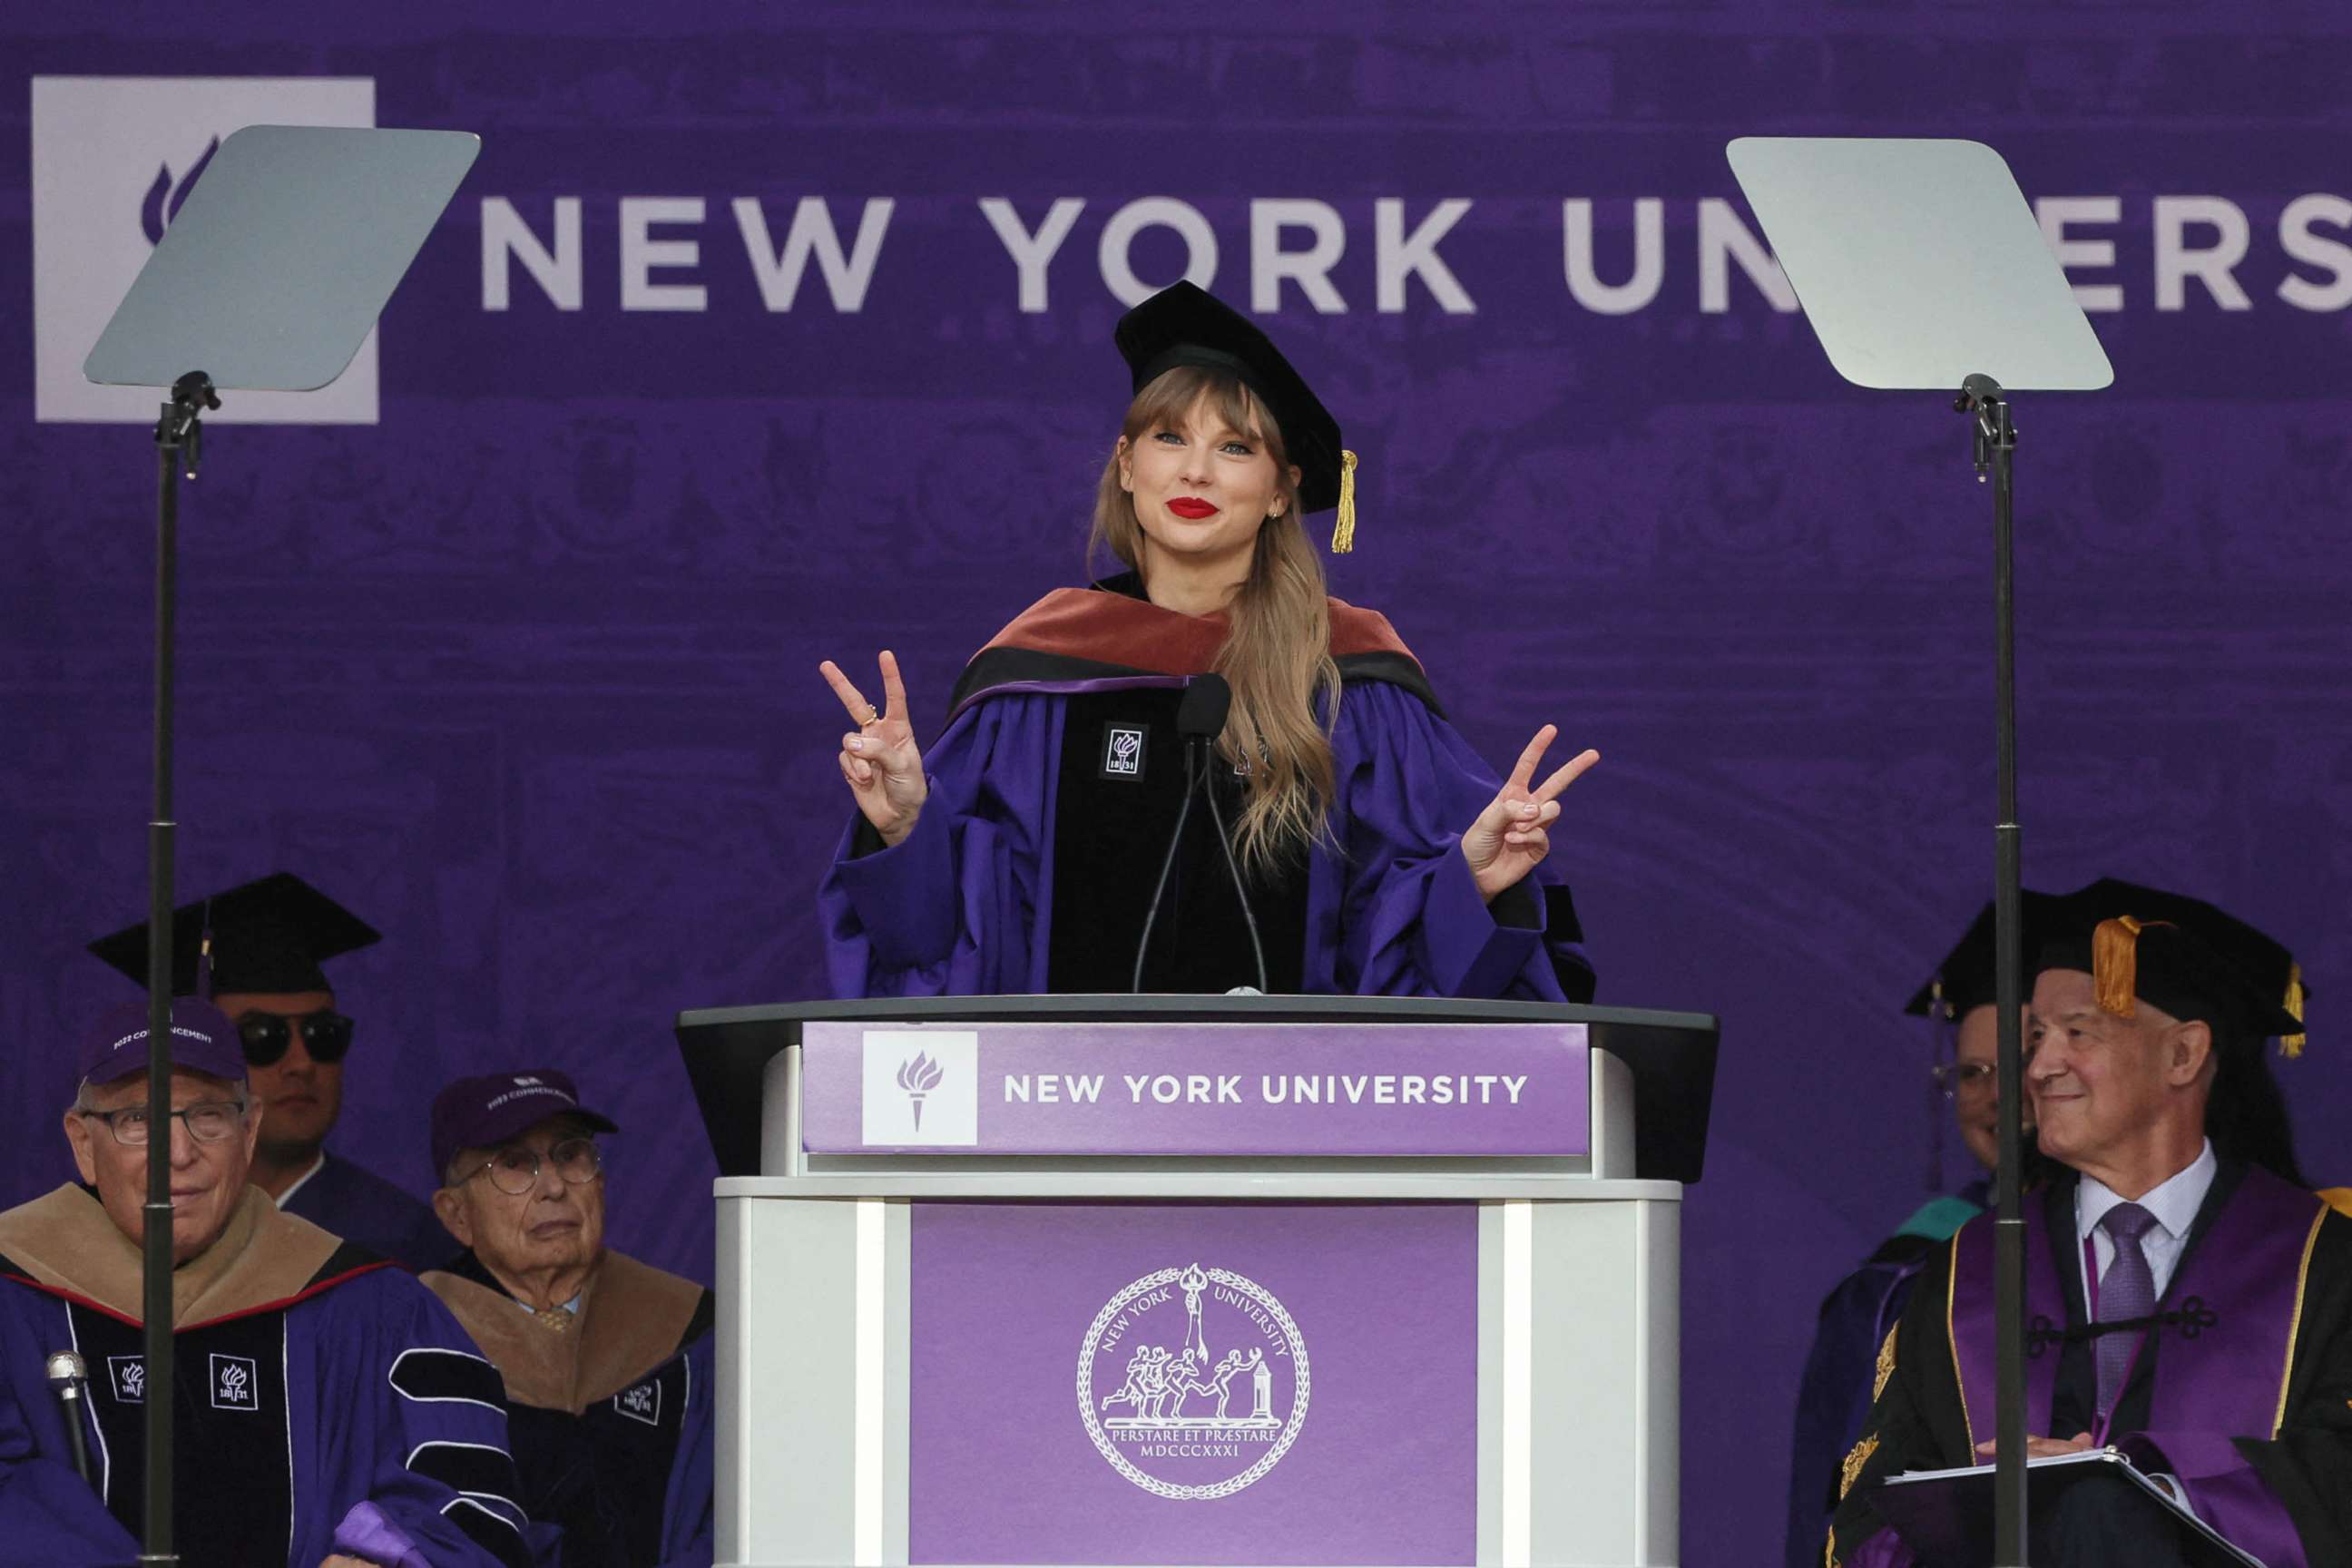 PHOTO: Singer Taylor Swift gestures while speaking after receiving her Honorary Doctorate in Fine Arts during the New York University graduation ceremony at Yankee Stadium in New York, May 18, 2022.